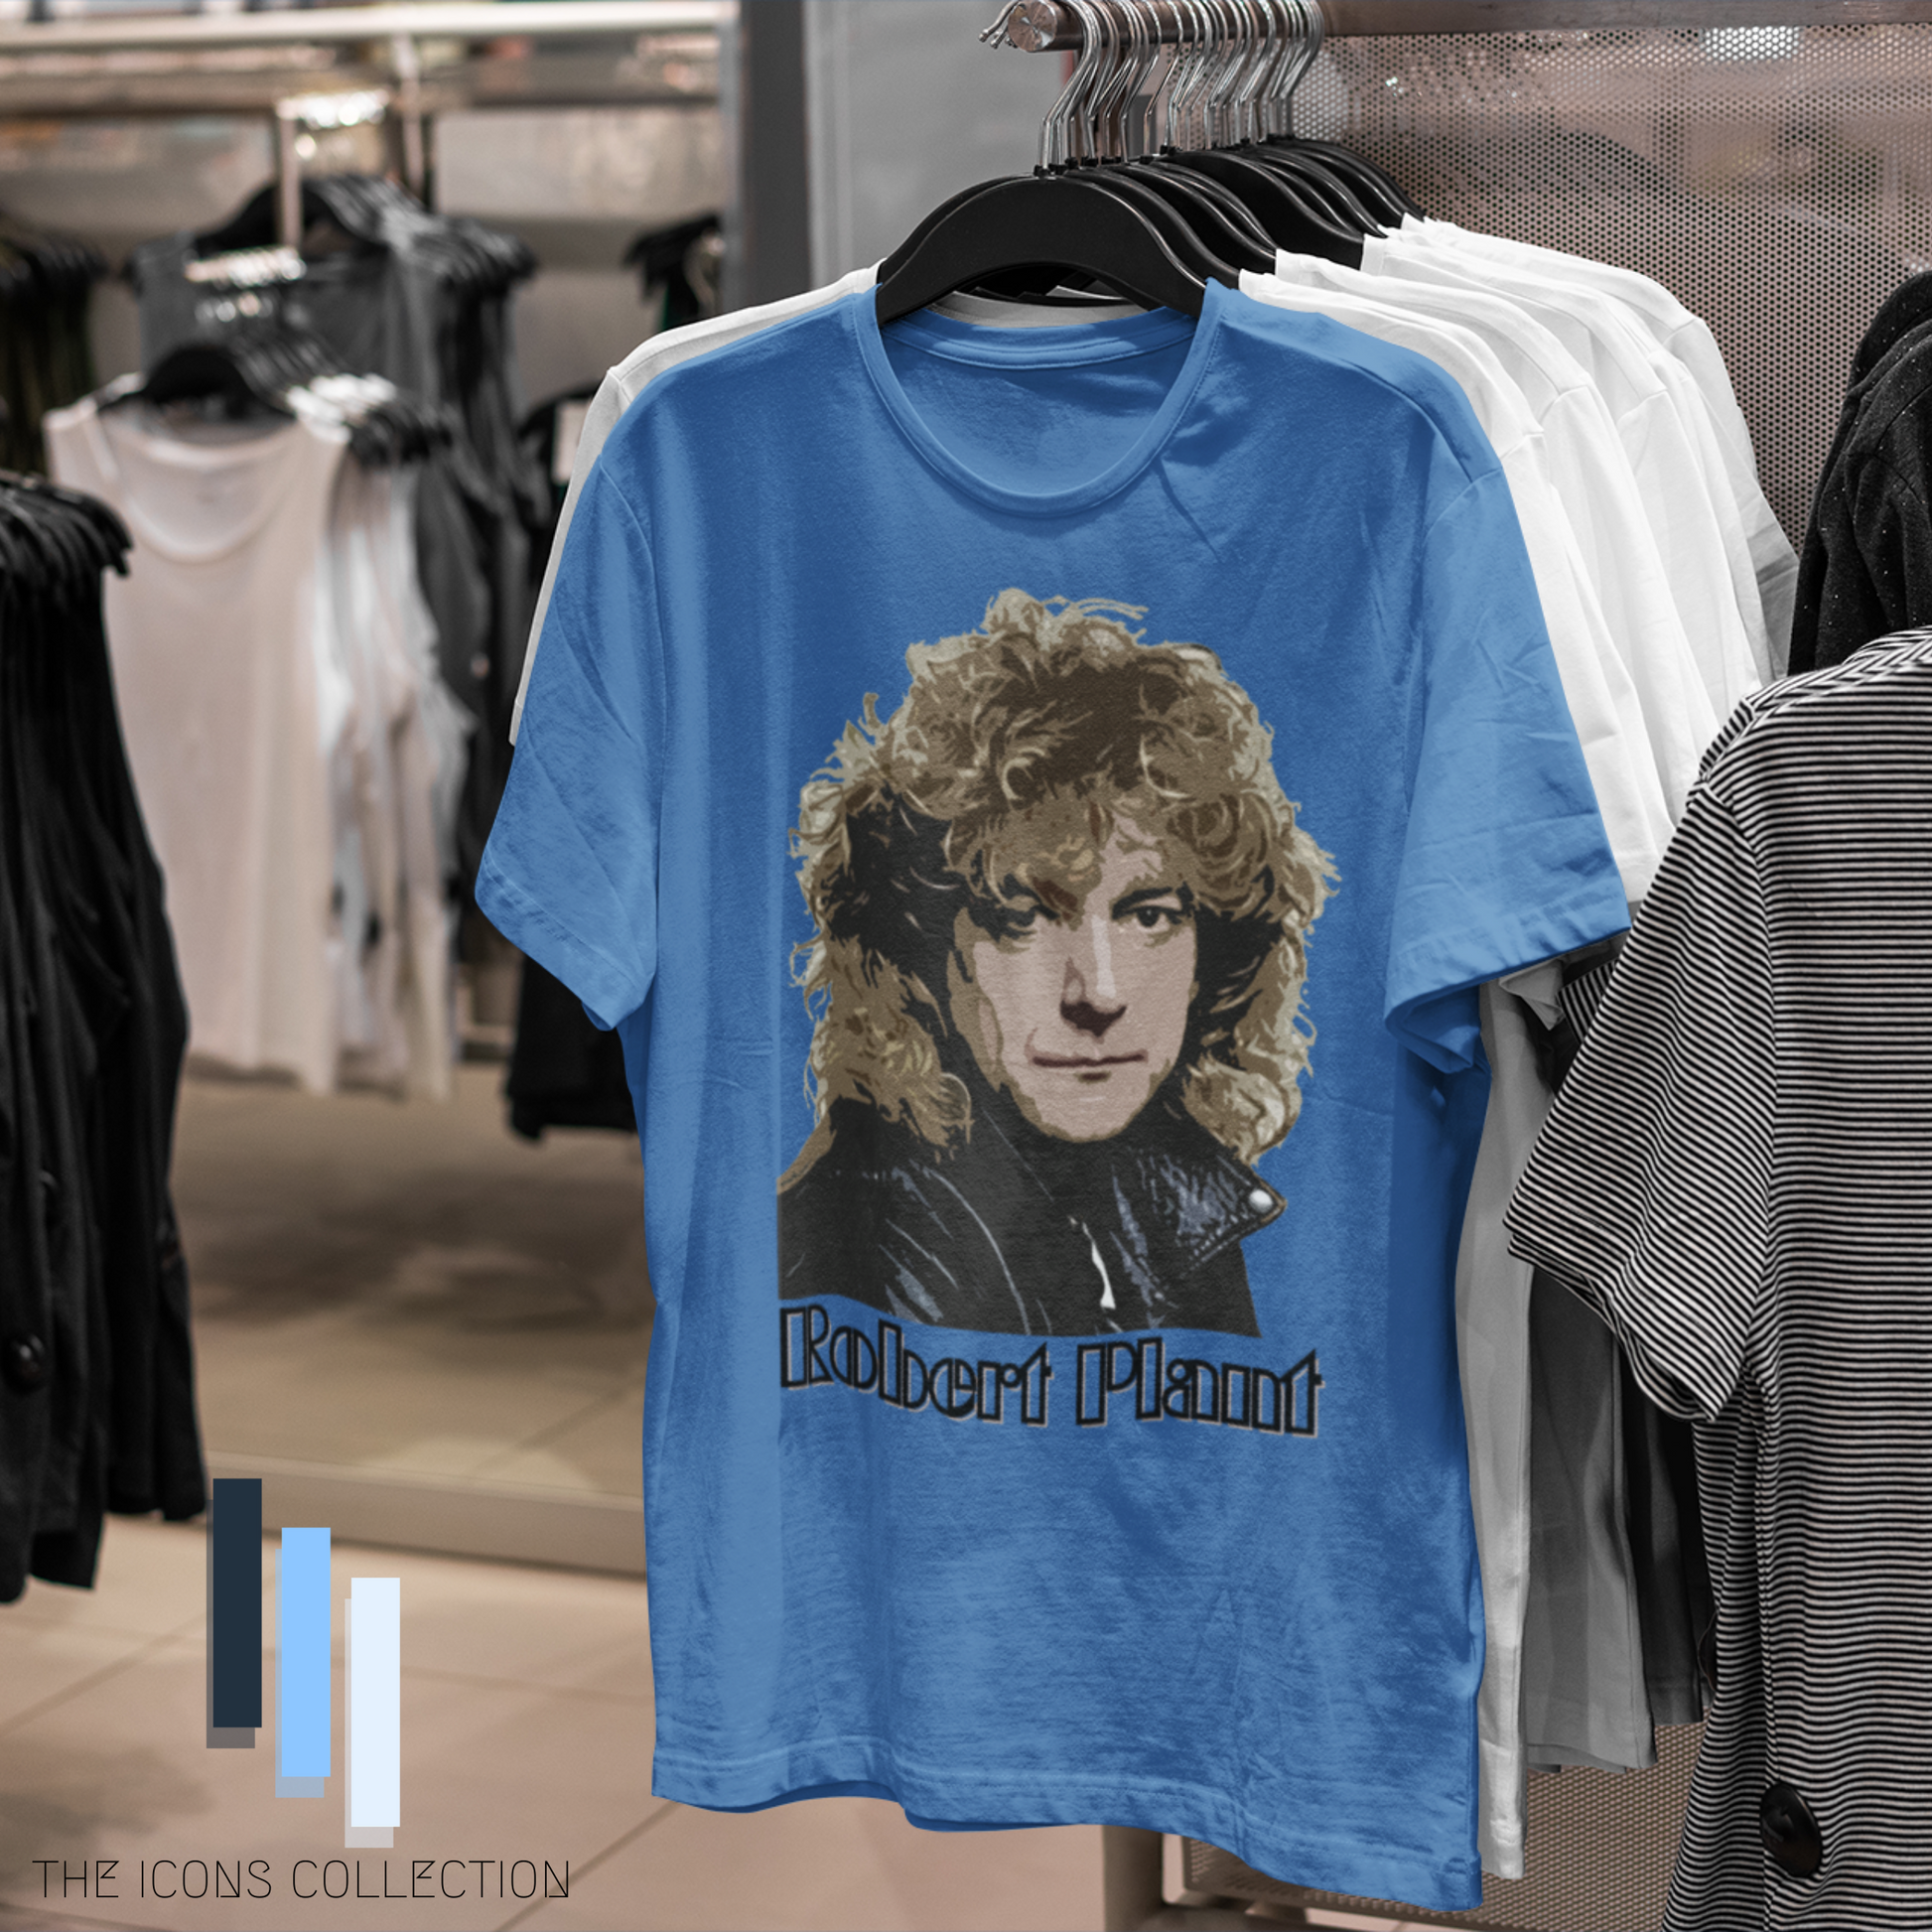 Led / Robert Plant in songs - Premium T Shirt The Icons Collection